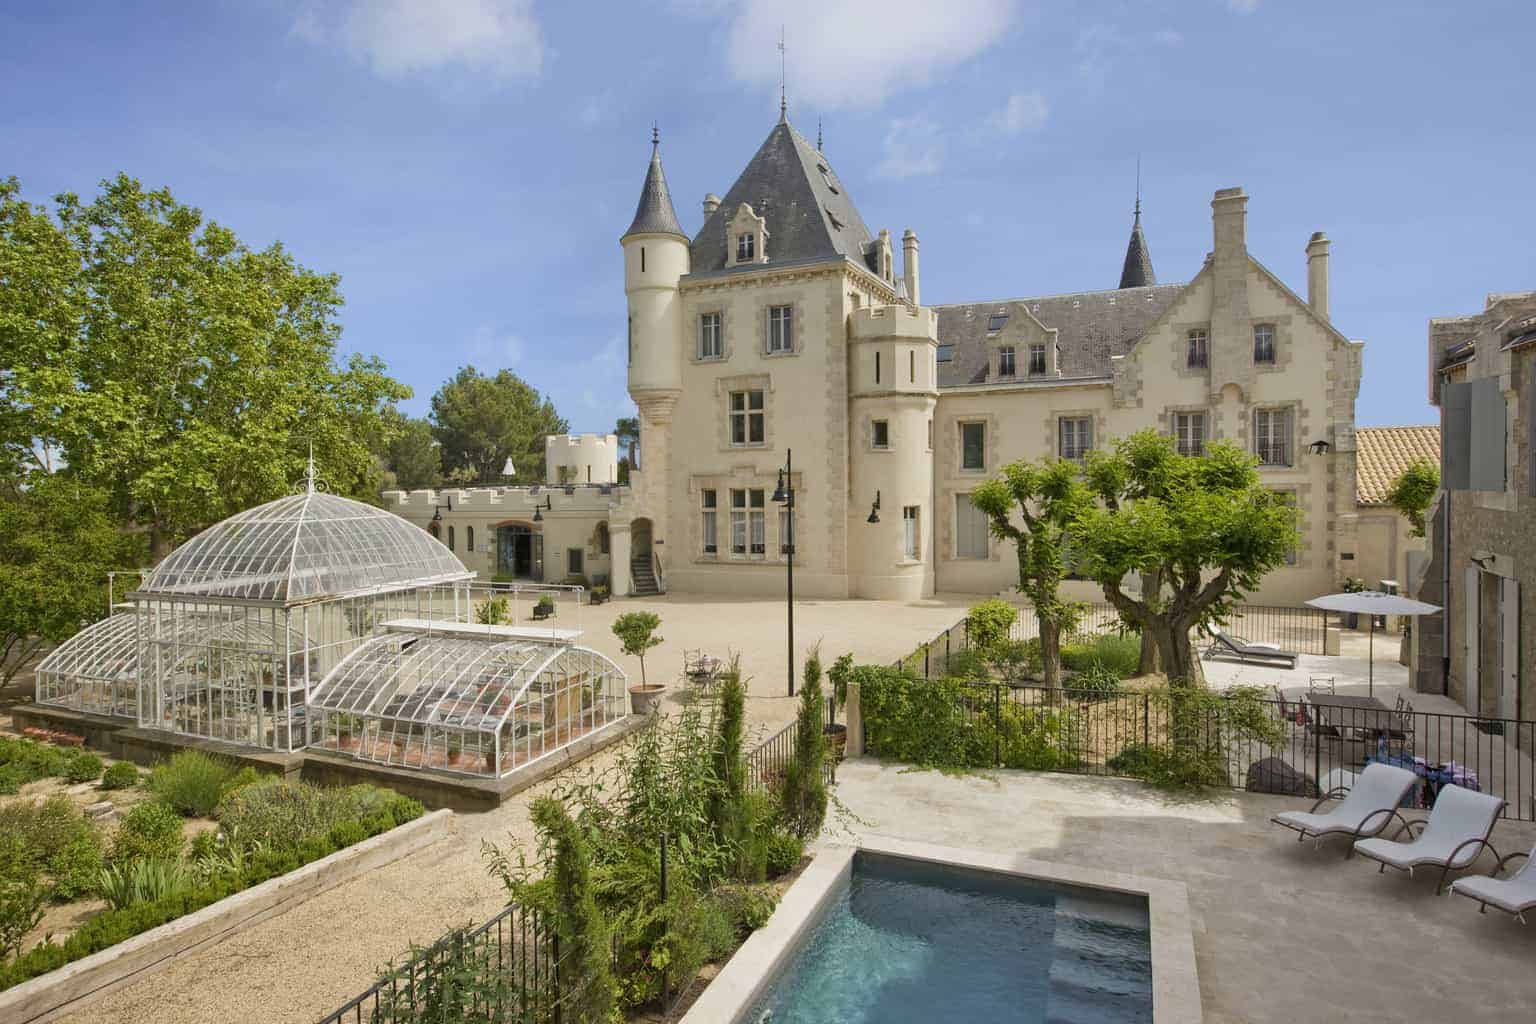 Château Les Carrasses - one of the most stunning Chateau Hotels in France